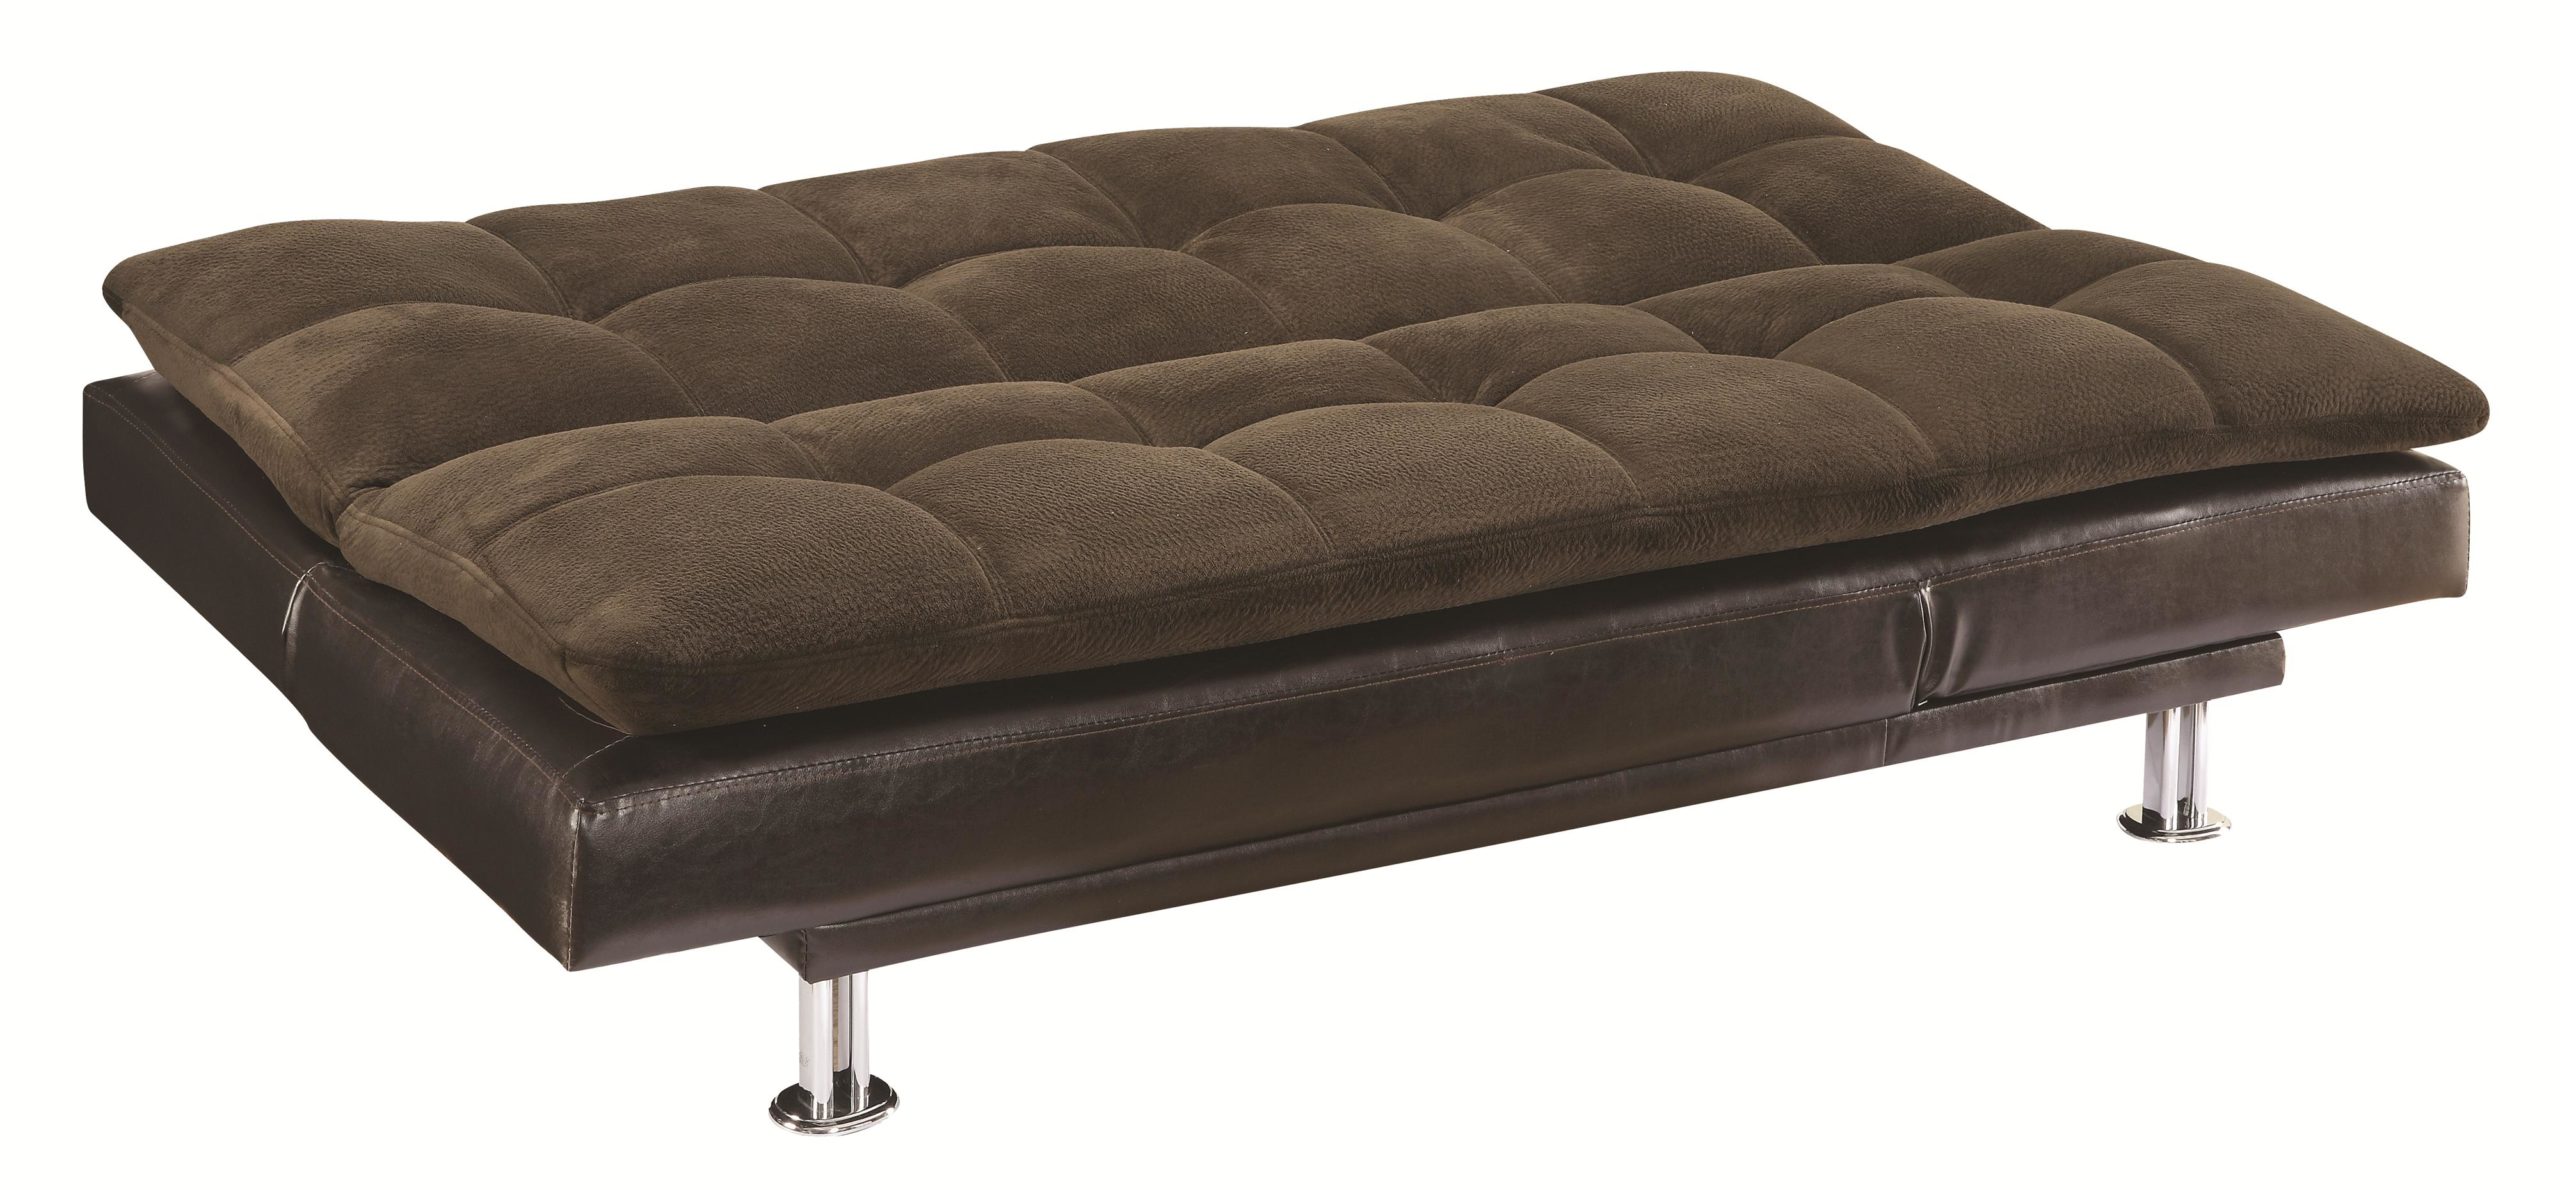 Millie Sofa Bed with Chrome Legs Down position